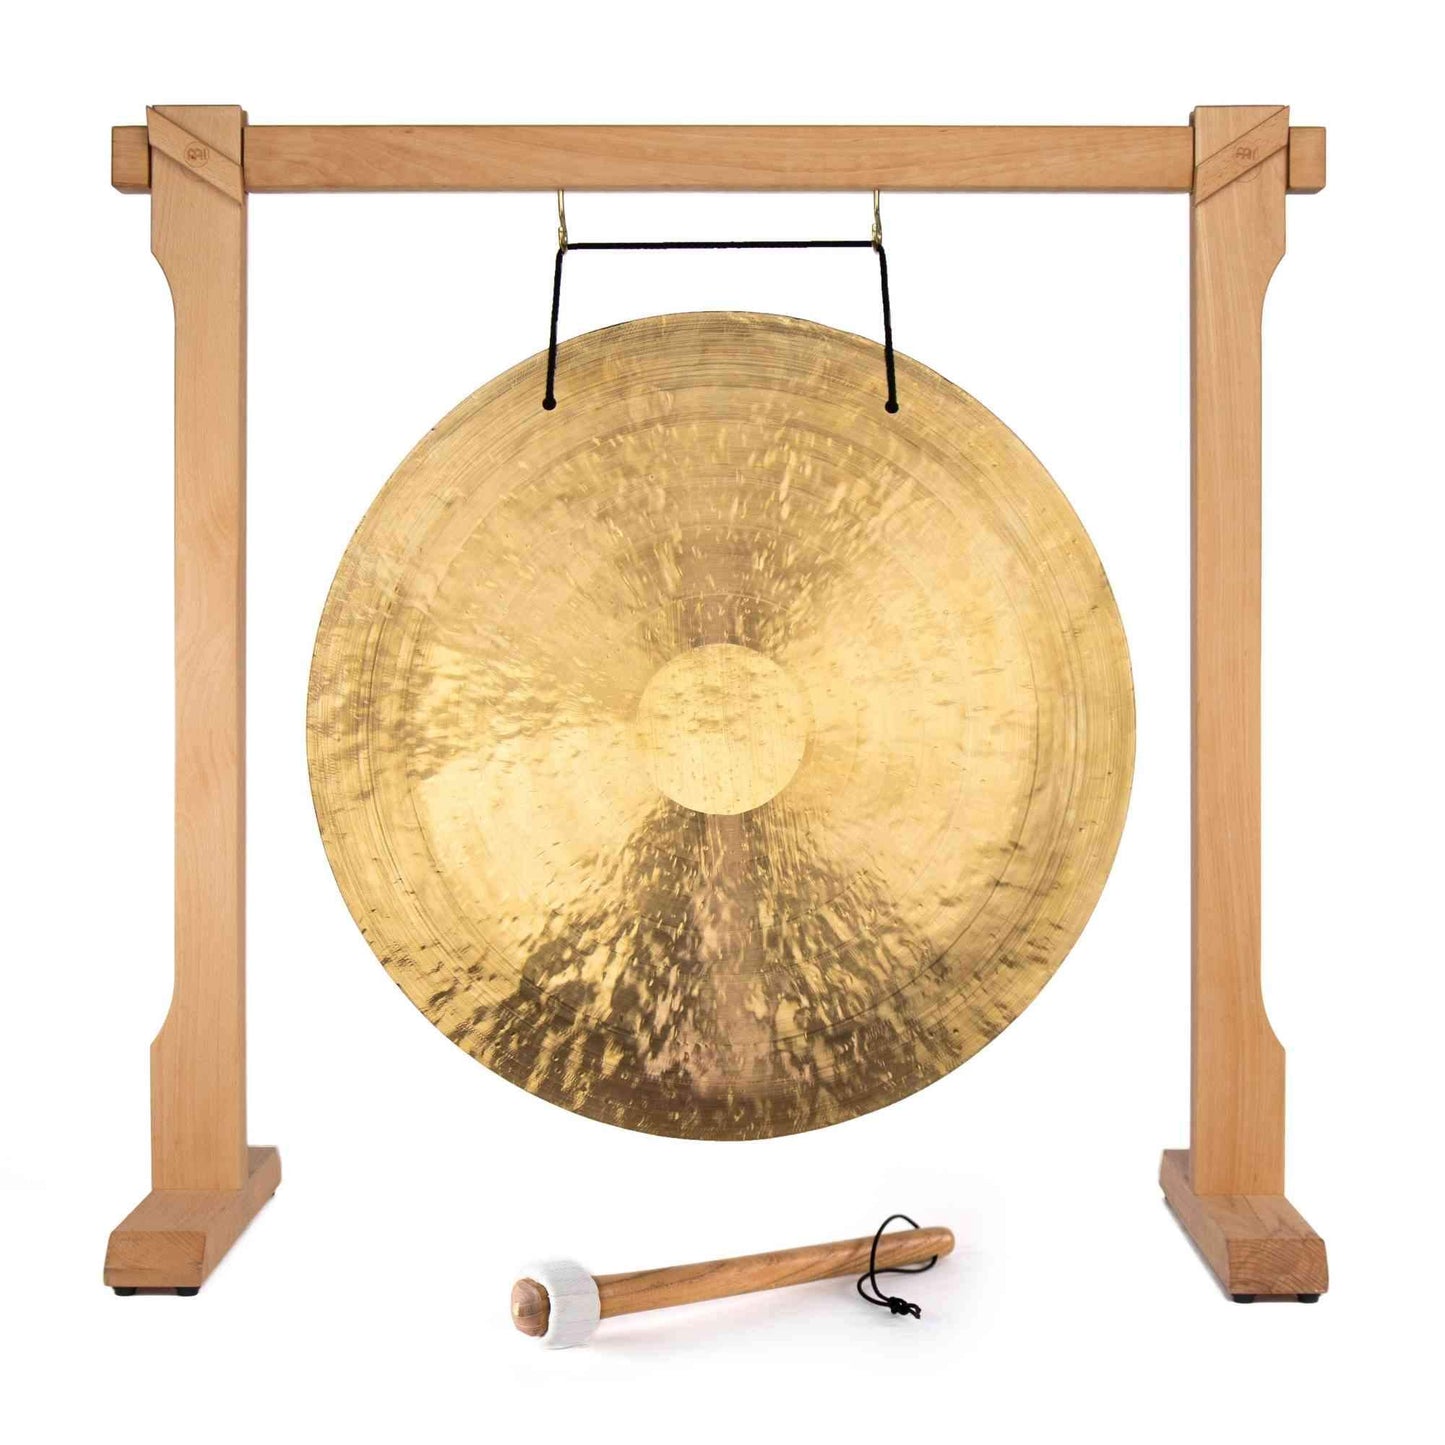 The Gong Shop Chinese Gongs with Stands 40" Chinese Wind Gong on Meinl Wooden Gong Stand with Mallet